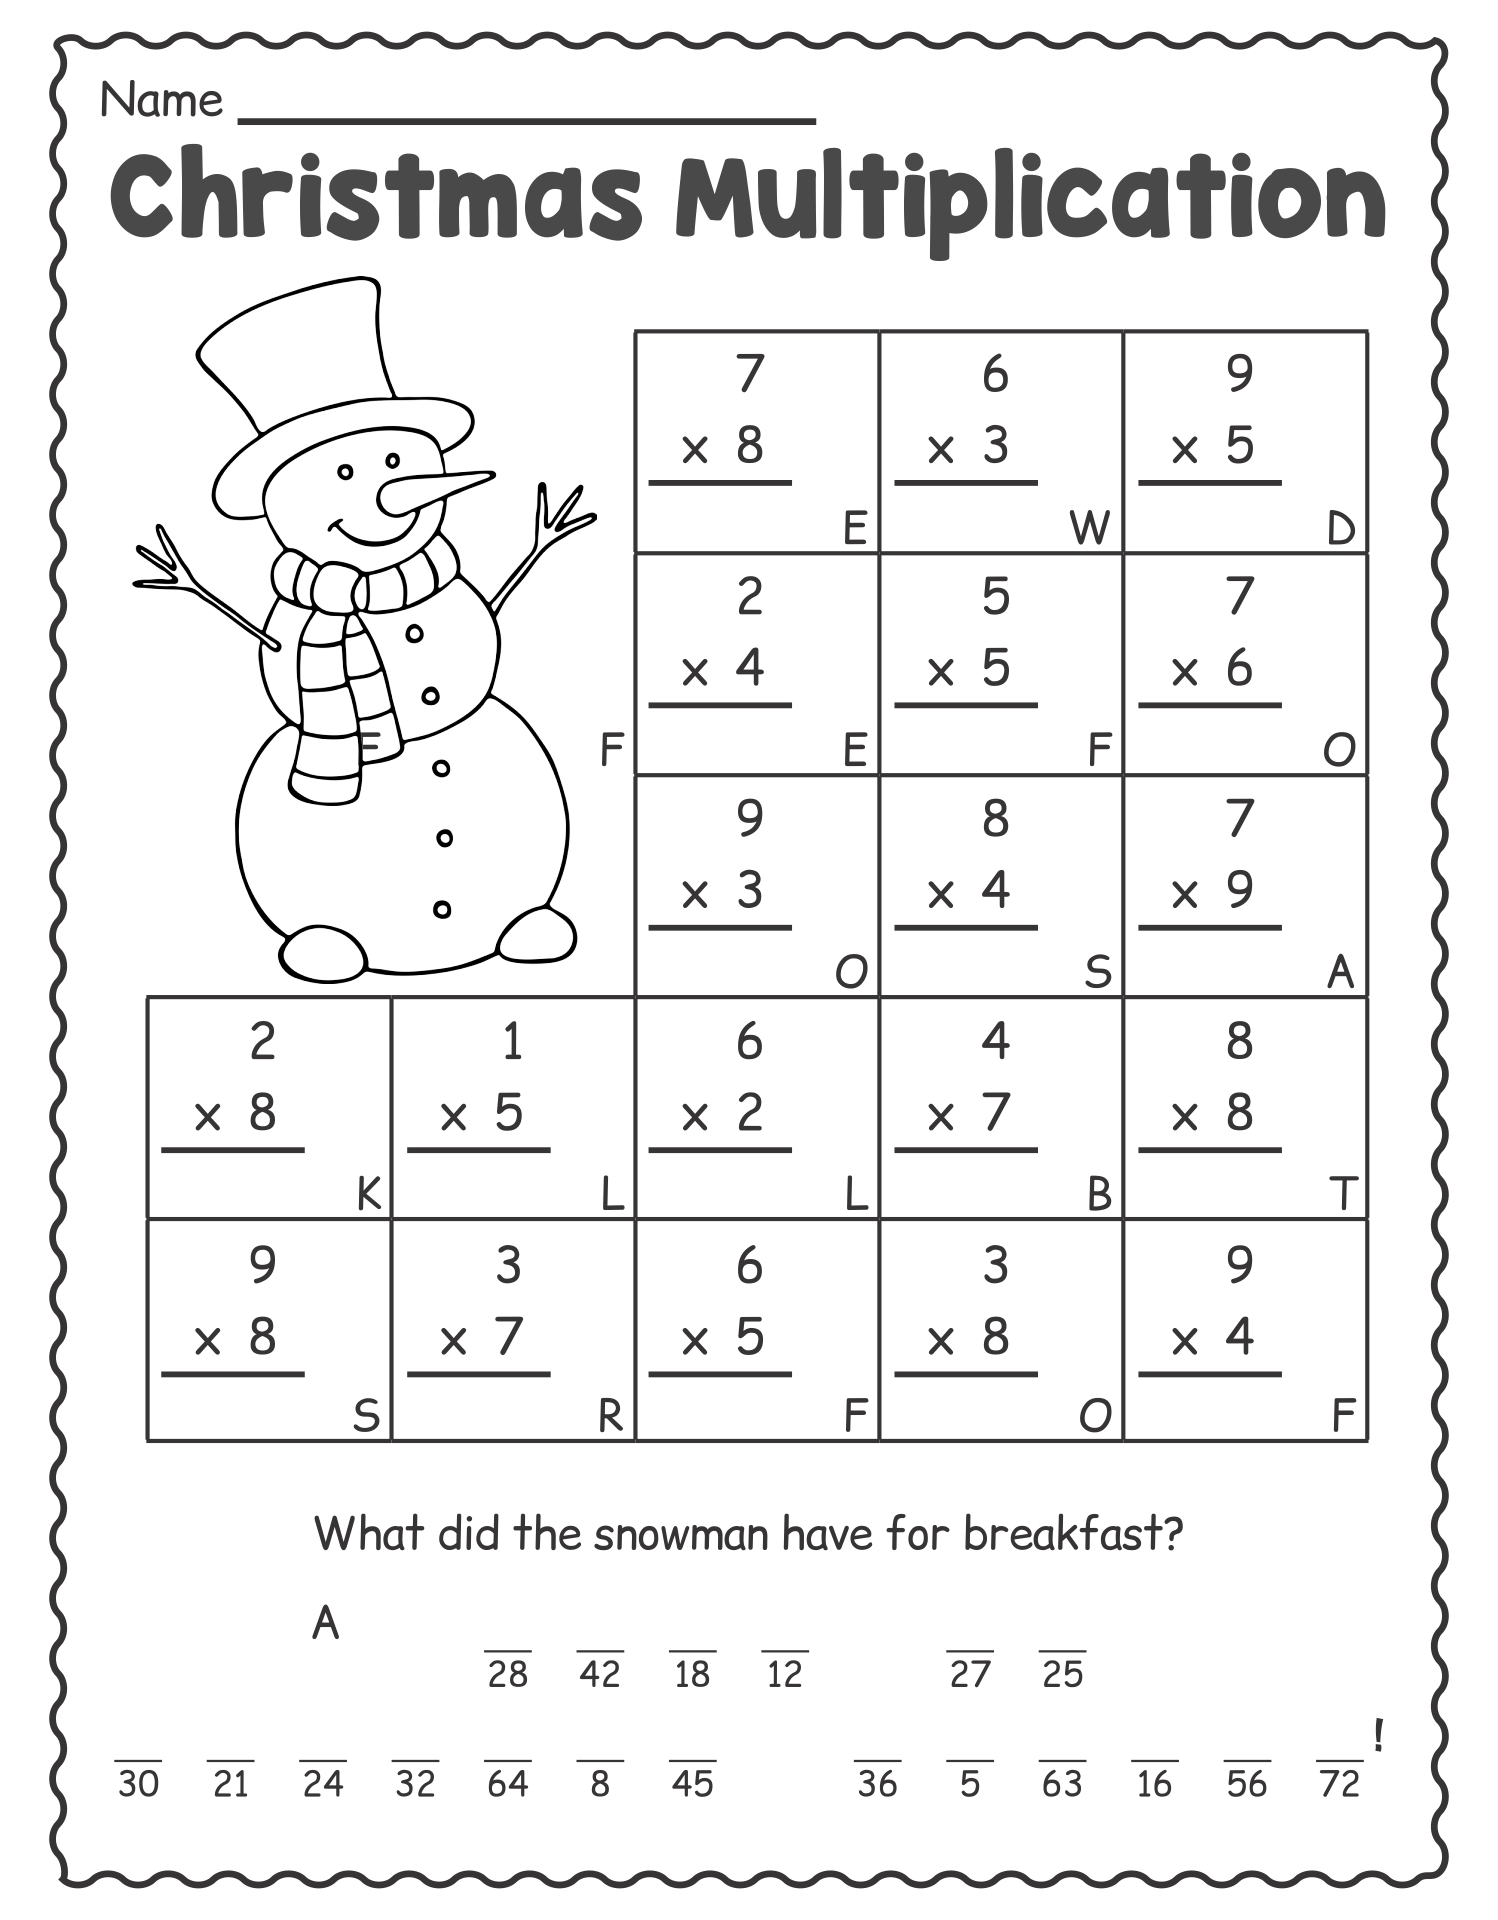 4-best-images-of-printable-worksheets-for-1st-grade-christmas